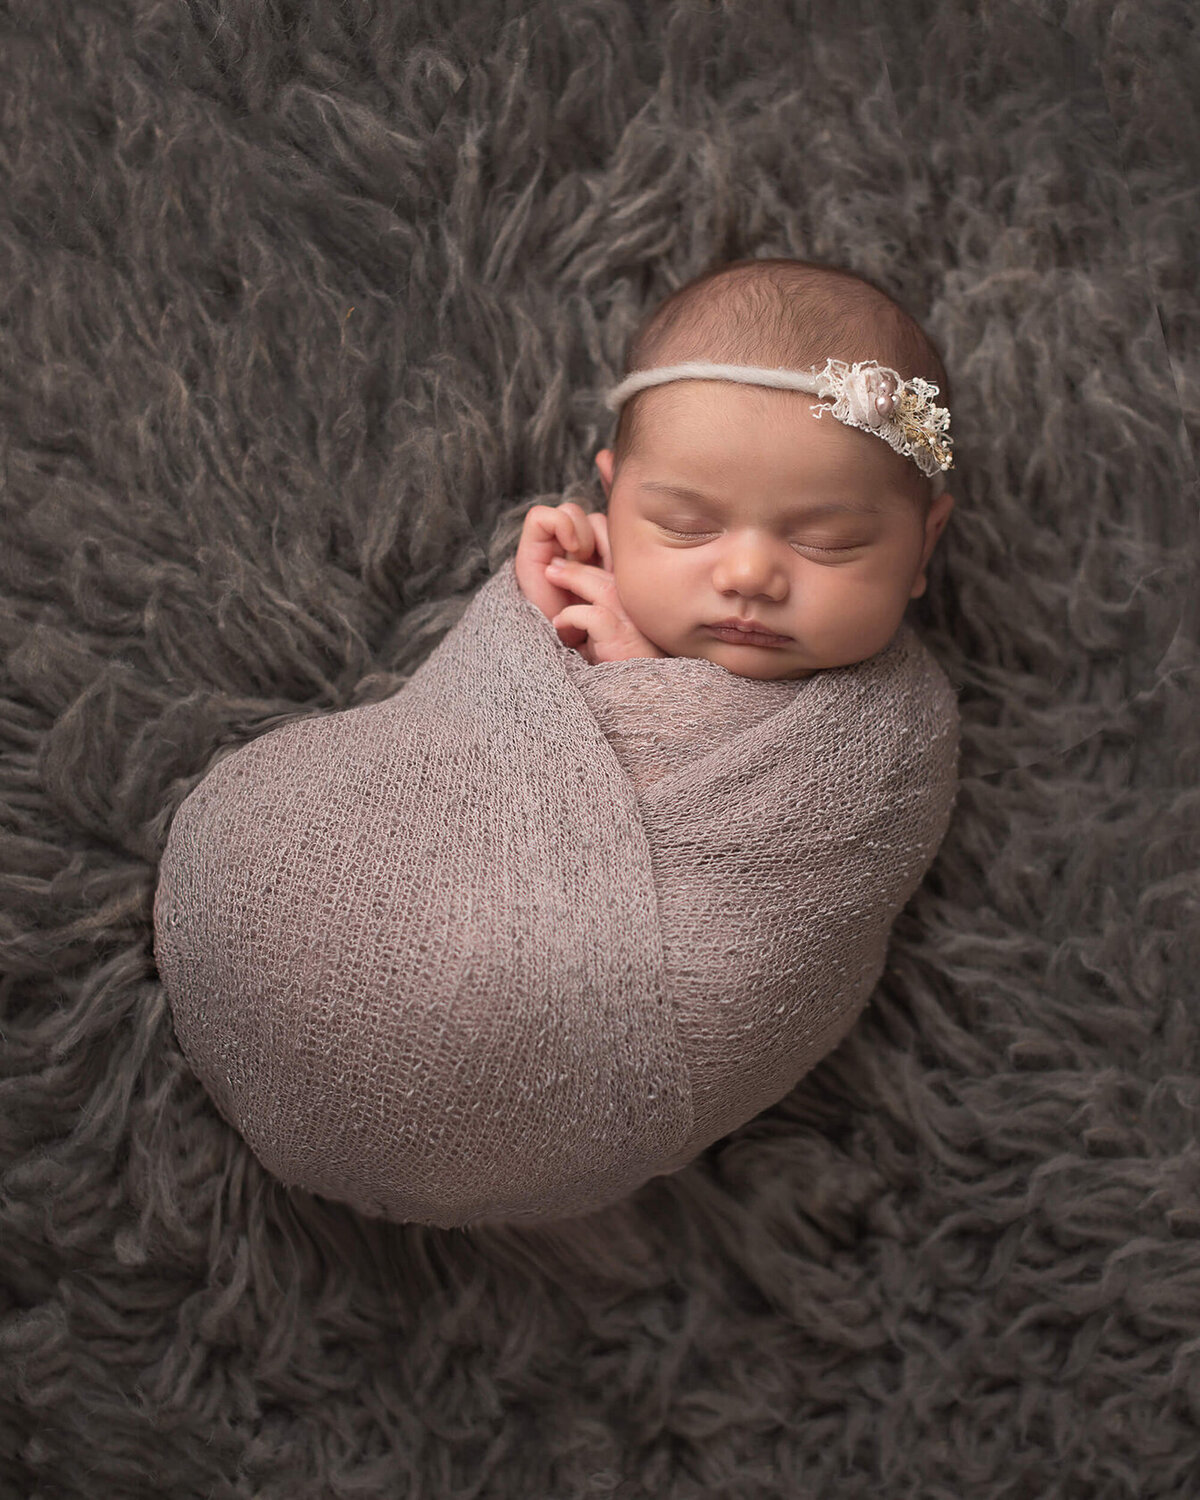 wrapped Newborn Portrait by Laura King Photography, Houston